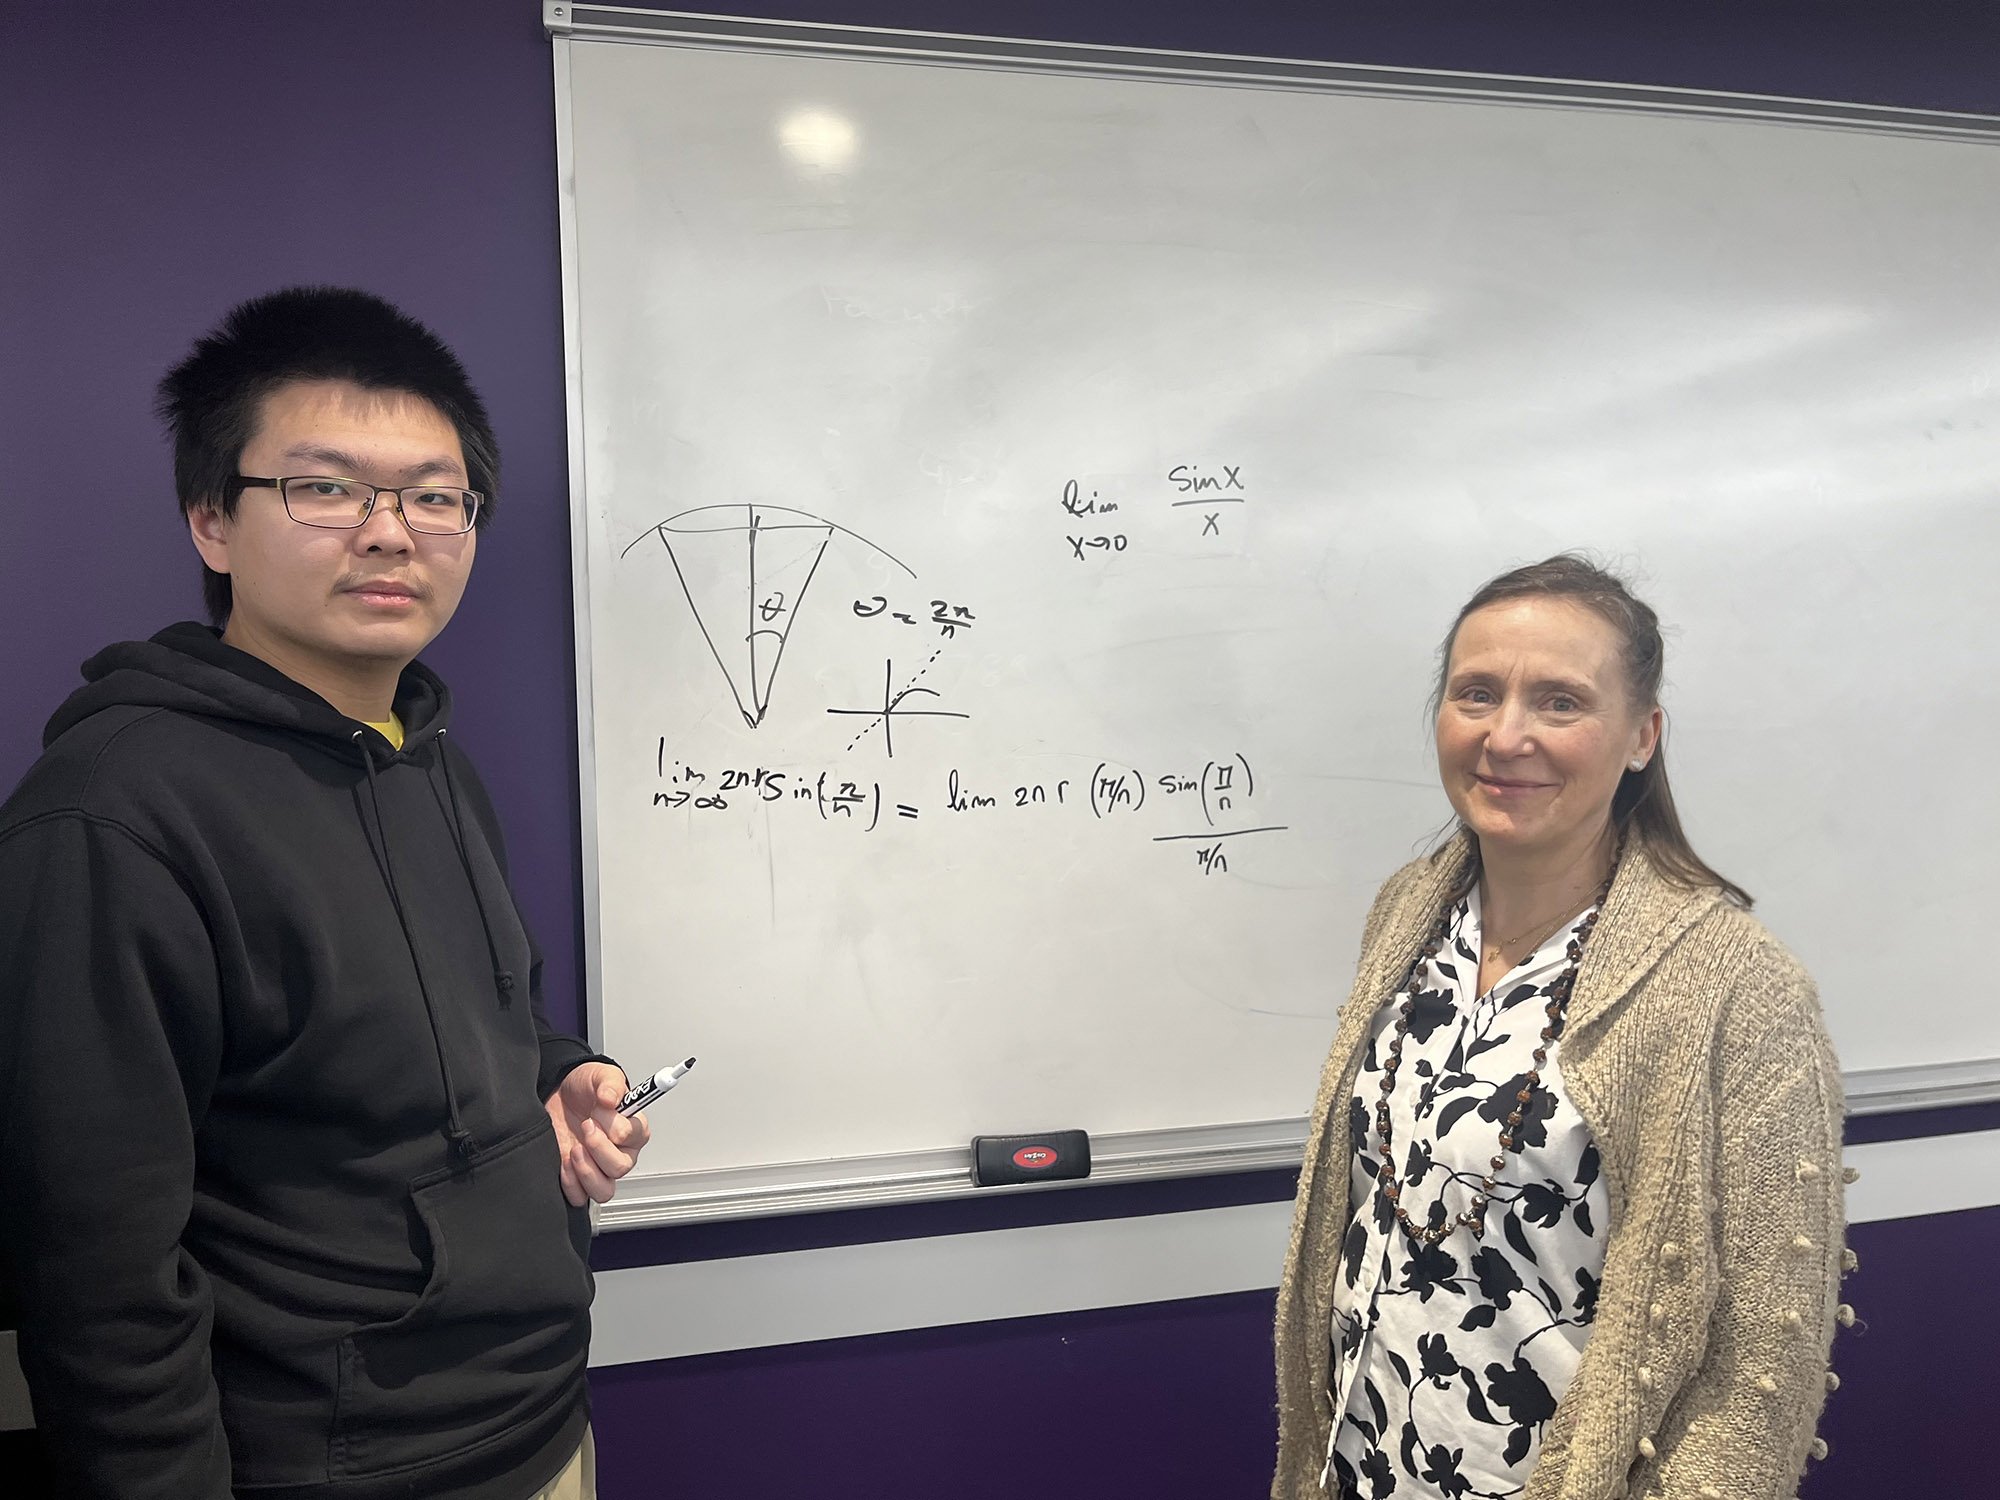 A student and a professor stand in front of a whiteboard with an equation on it.